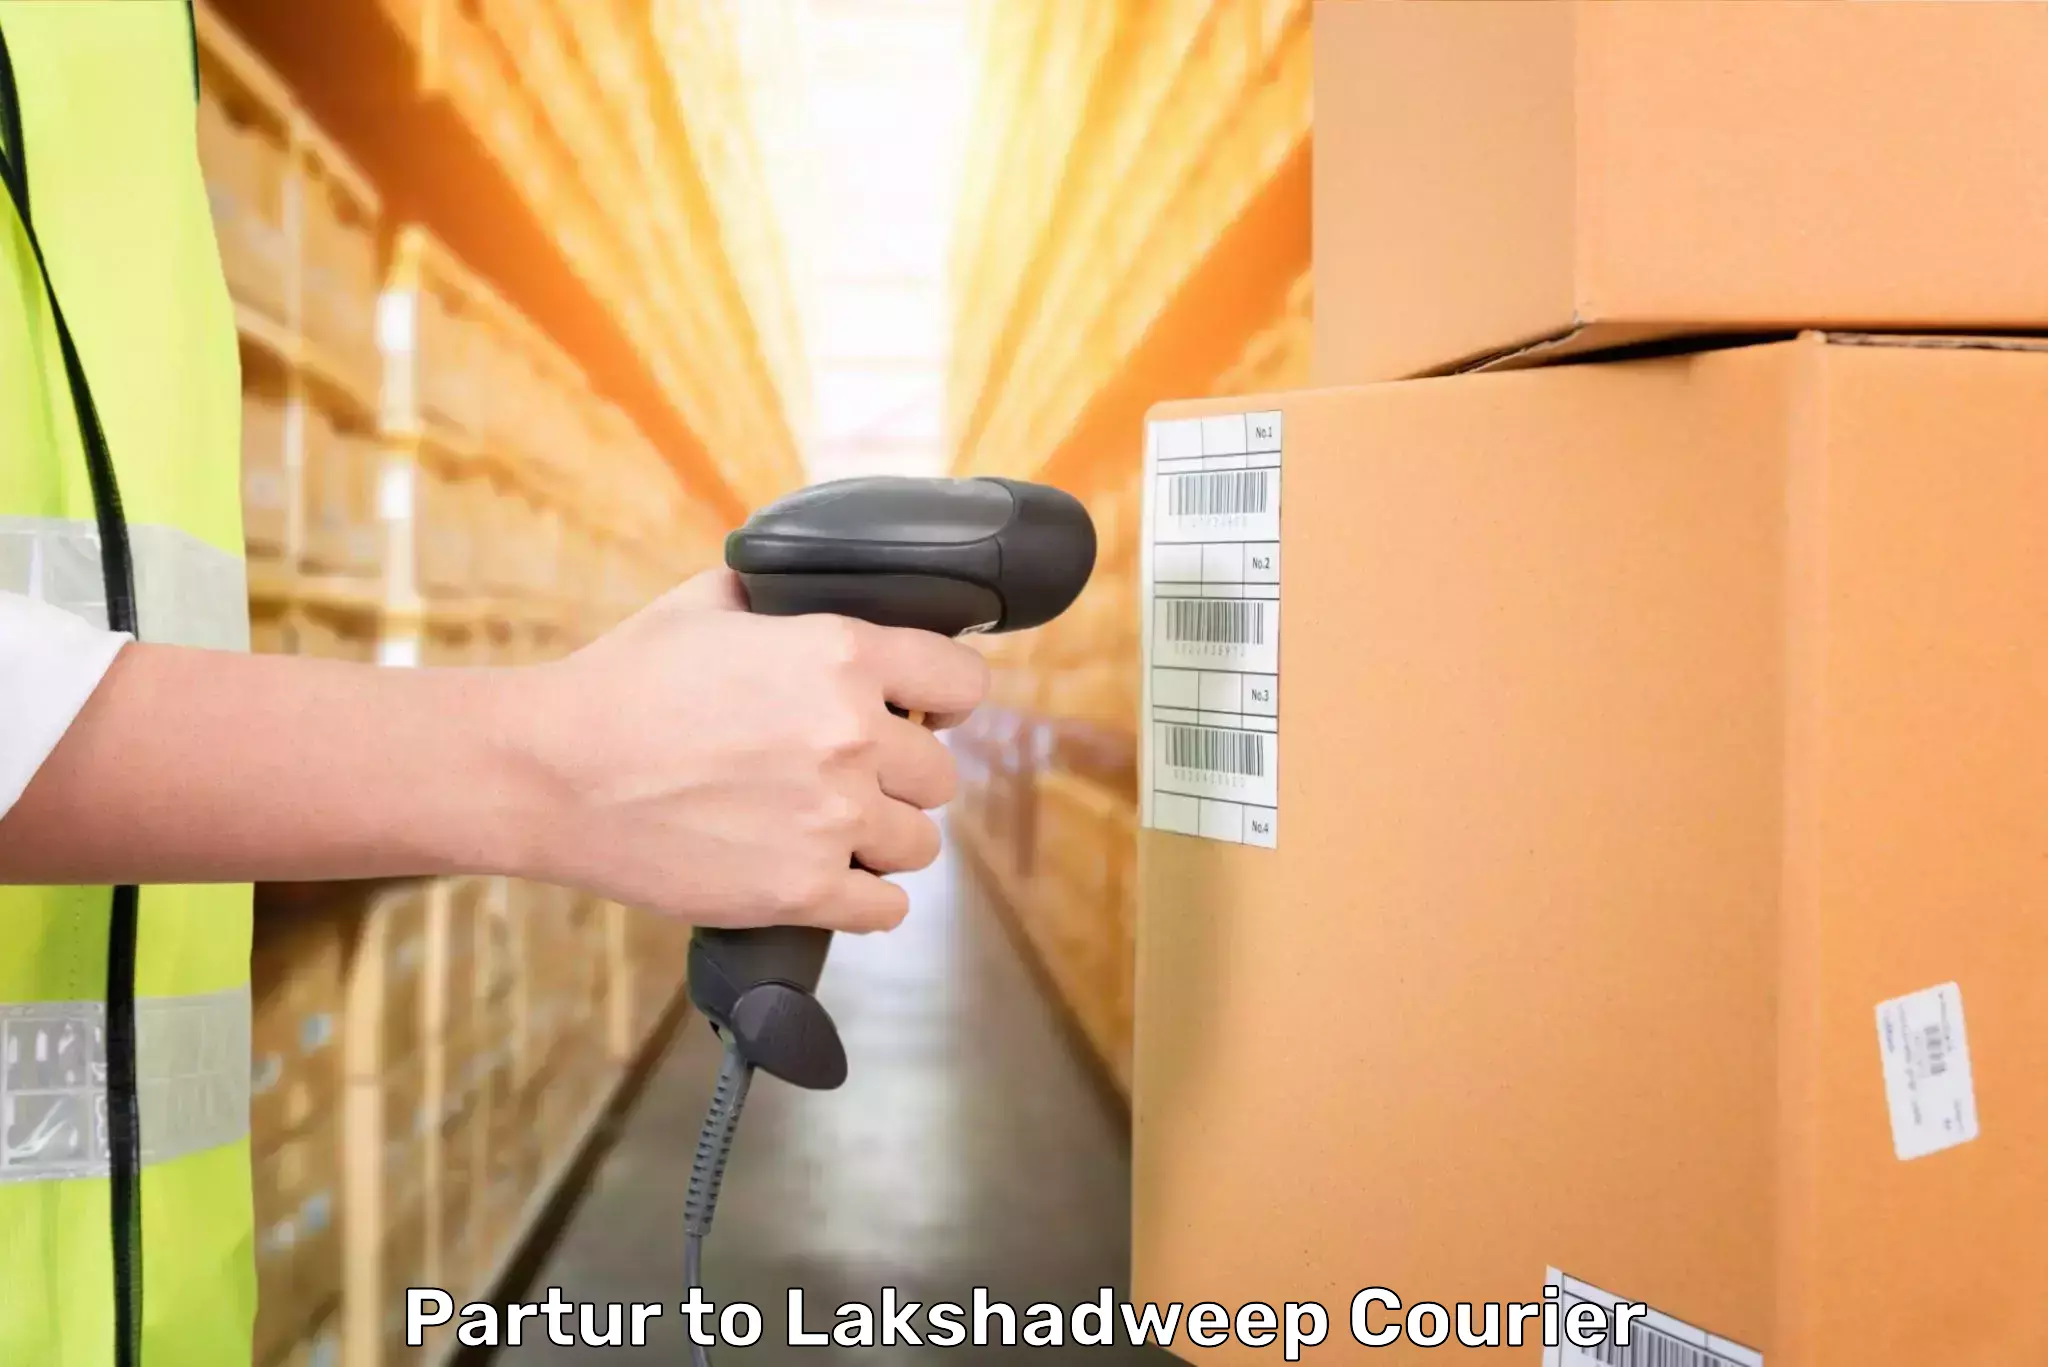 Online luggage shipping booking Partur to Lakshadweep